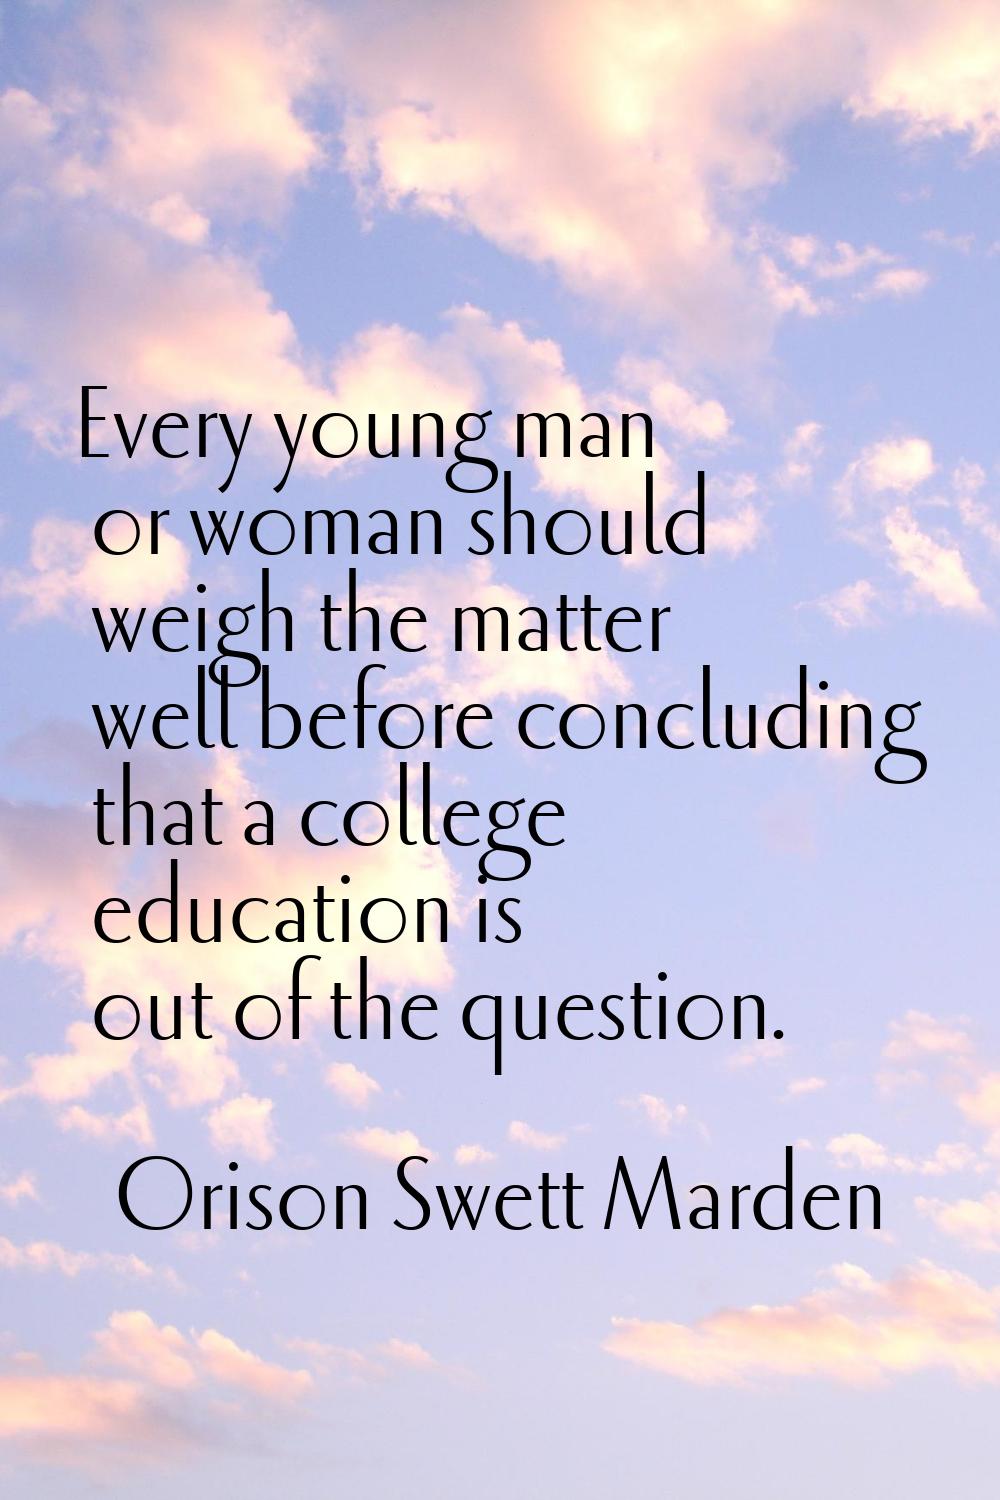 Every young man or woman should weigh the matter well before concluding that a college education is